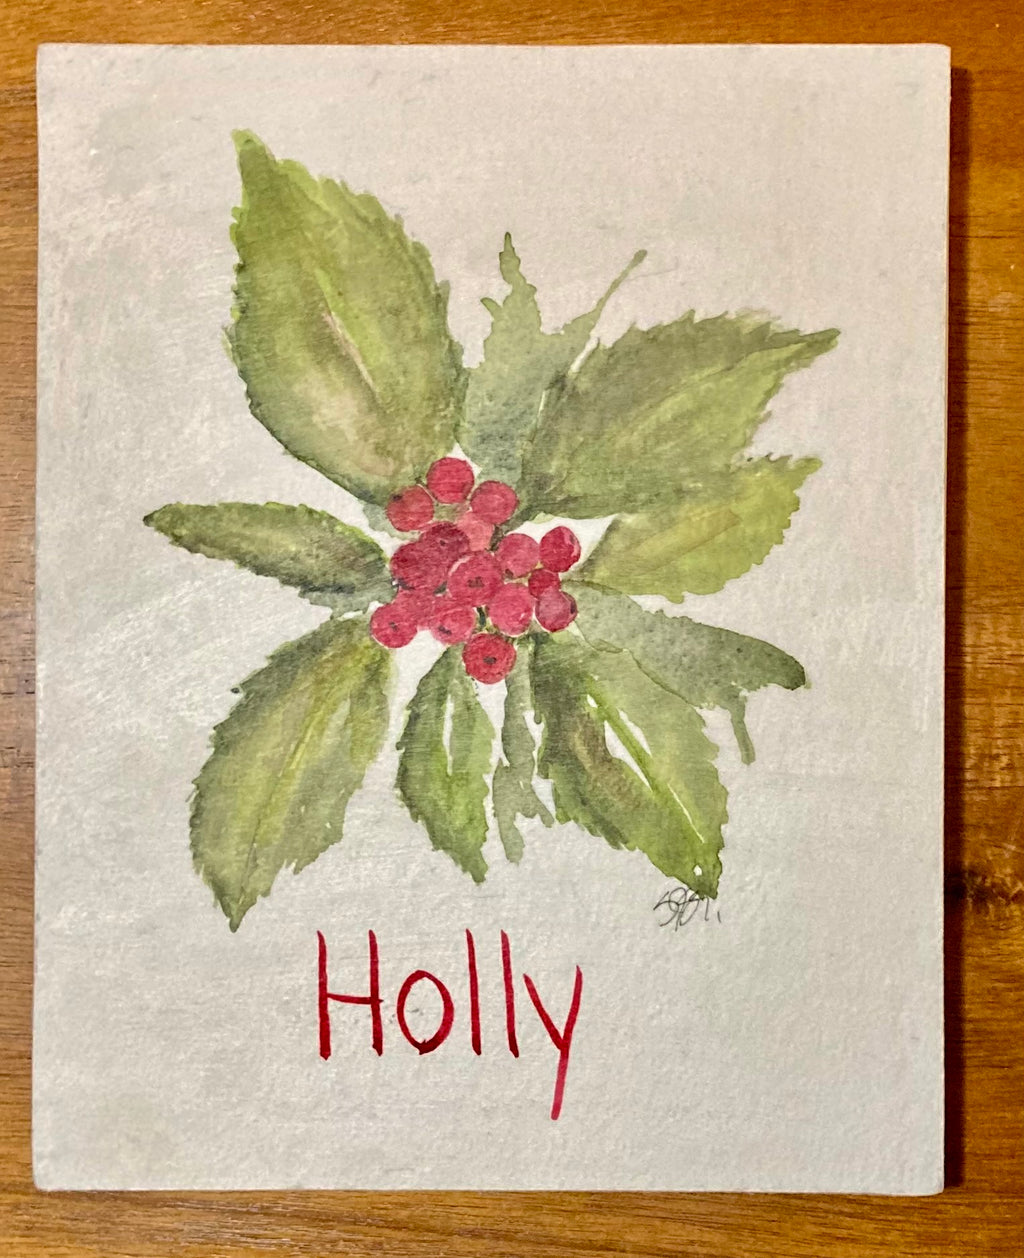 Holly - From the Words Every Child Should Know collection